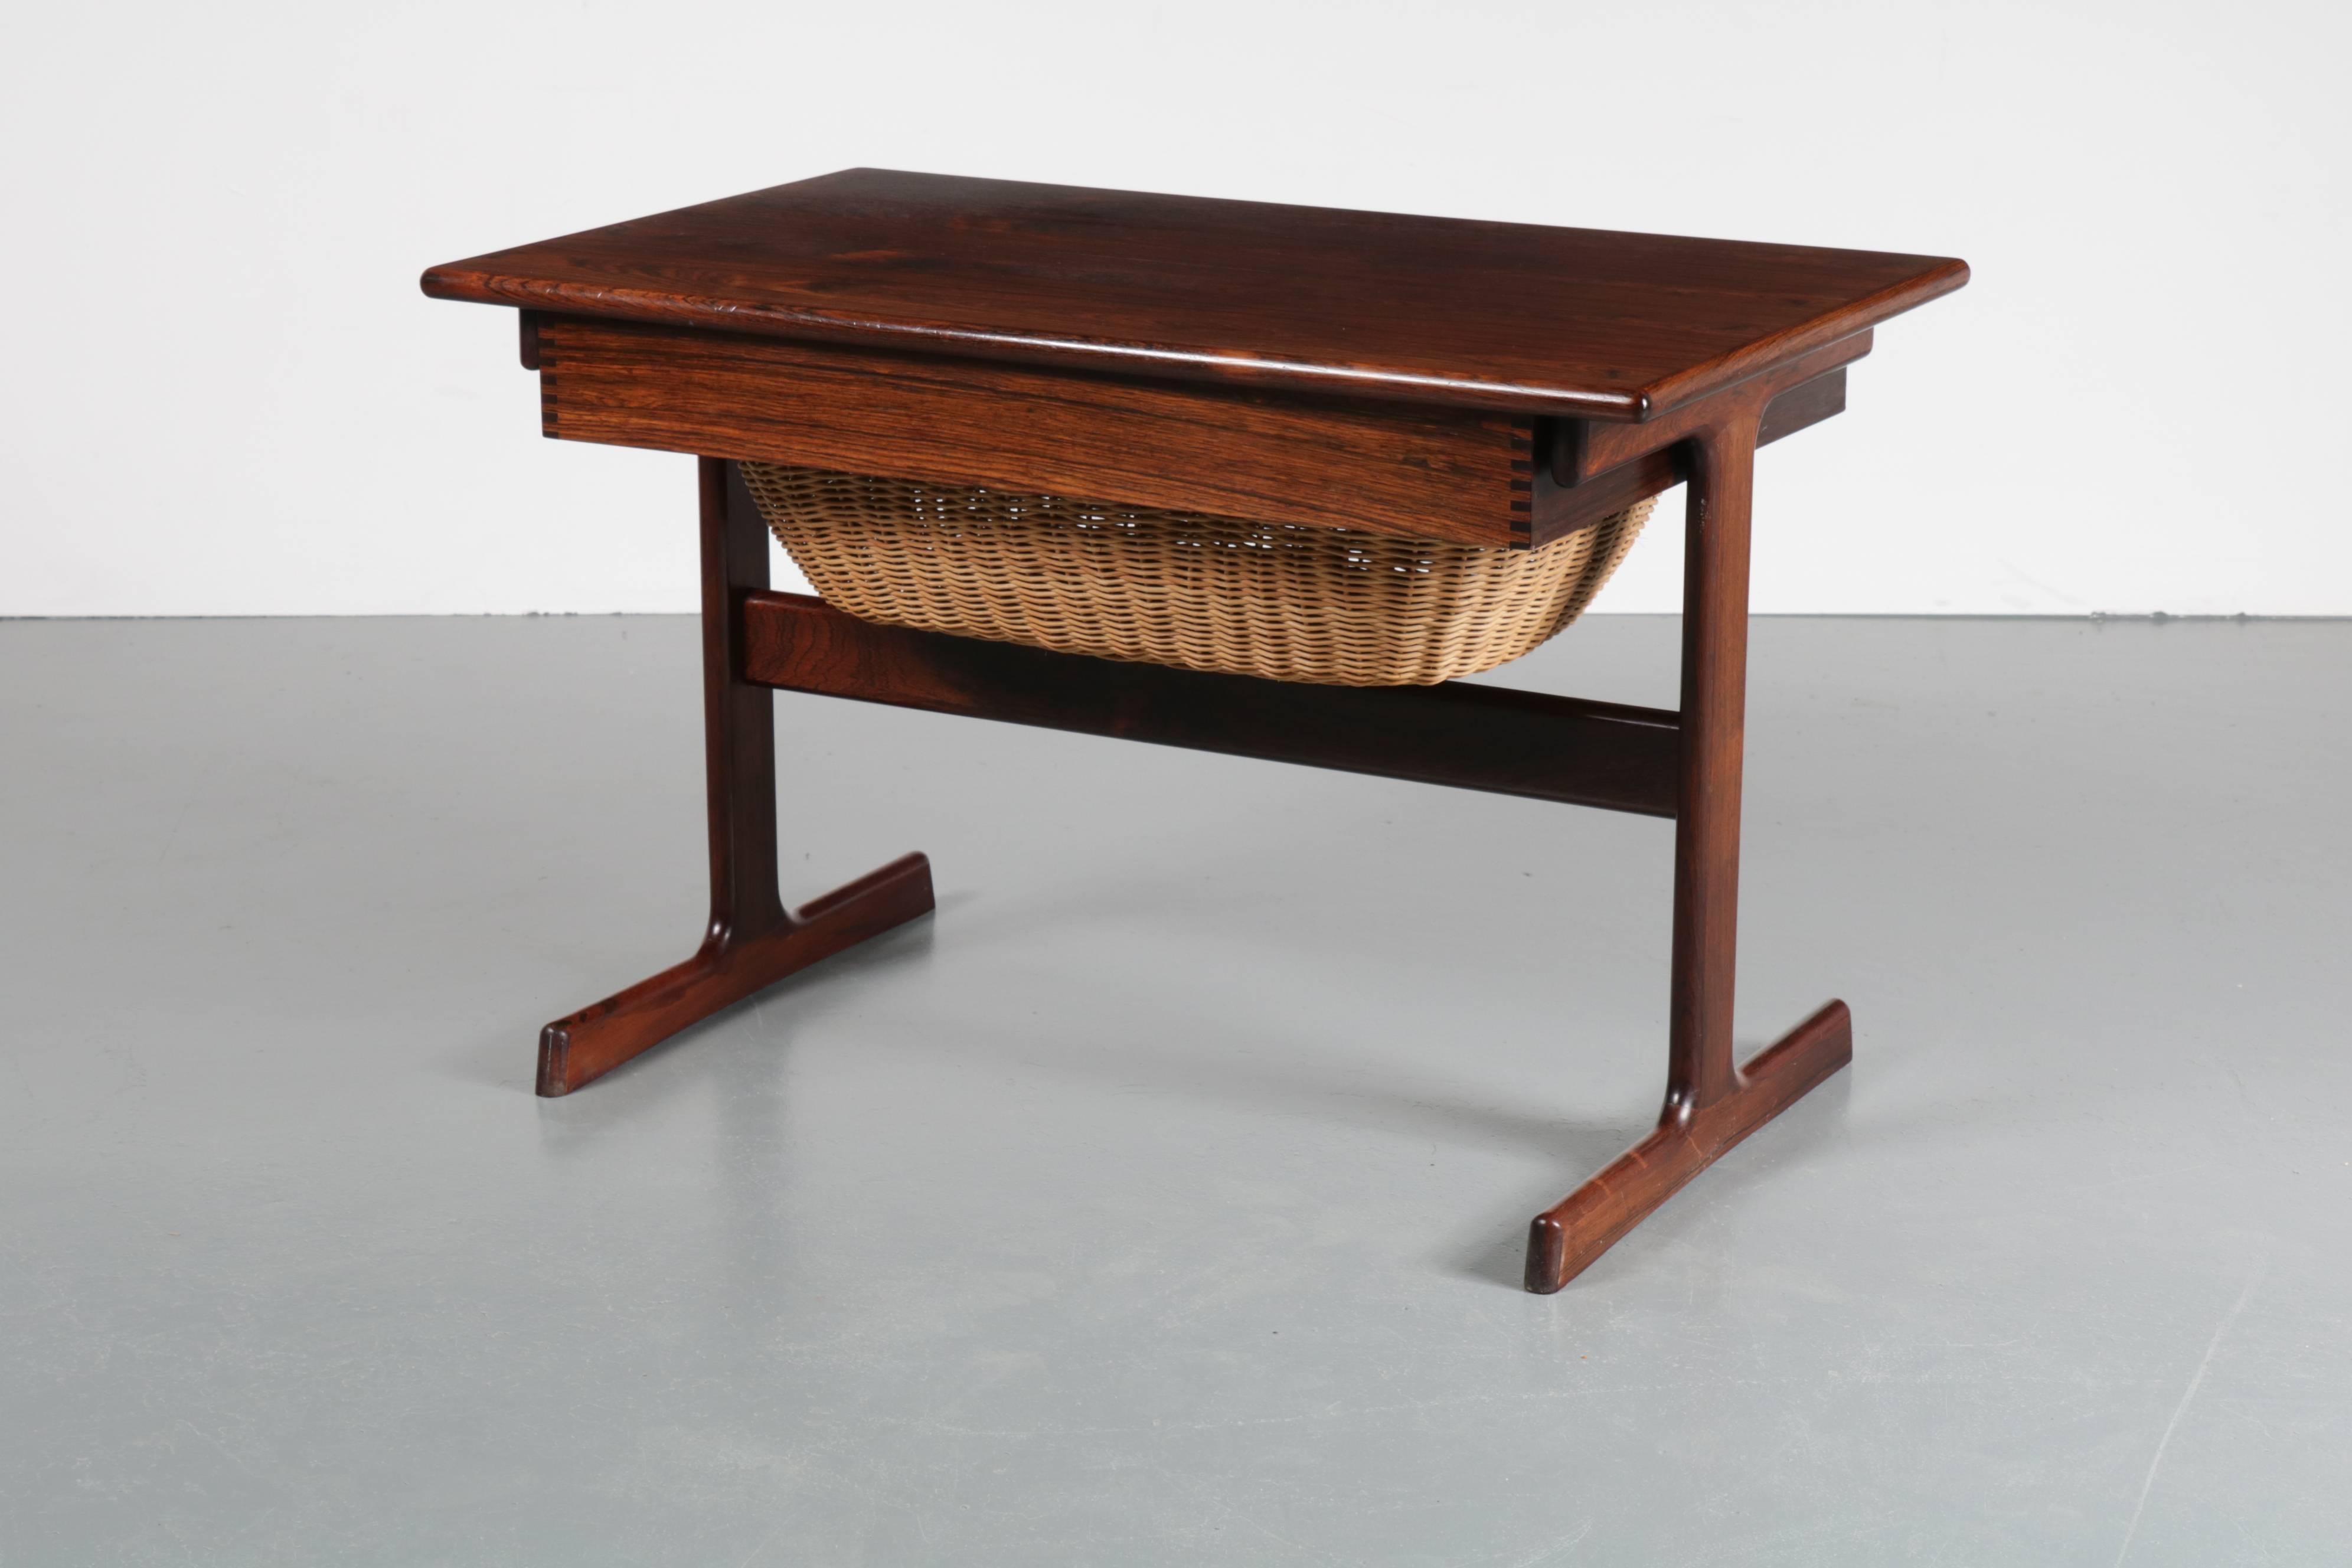 Beautiful sewing box designed by Kai Kristiansen, manufactured by Vildbjerg Møbelfabrik in Denmark, circa 1950.

This beautiful piece is made of high quality tropical hardwood. It is a small table that has a wicker basket and a drawer with several